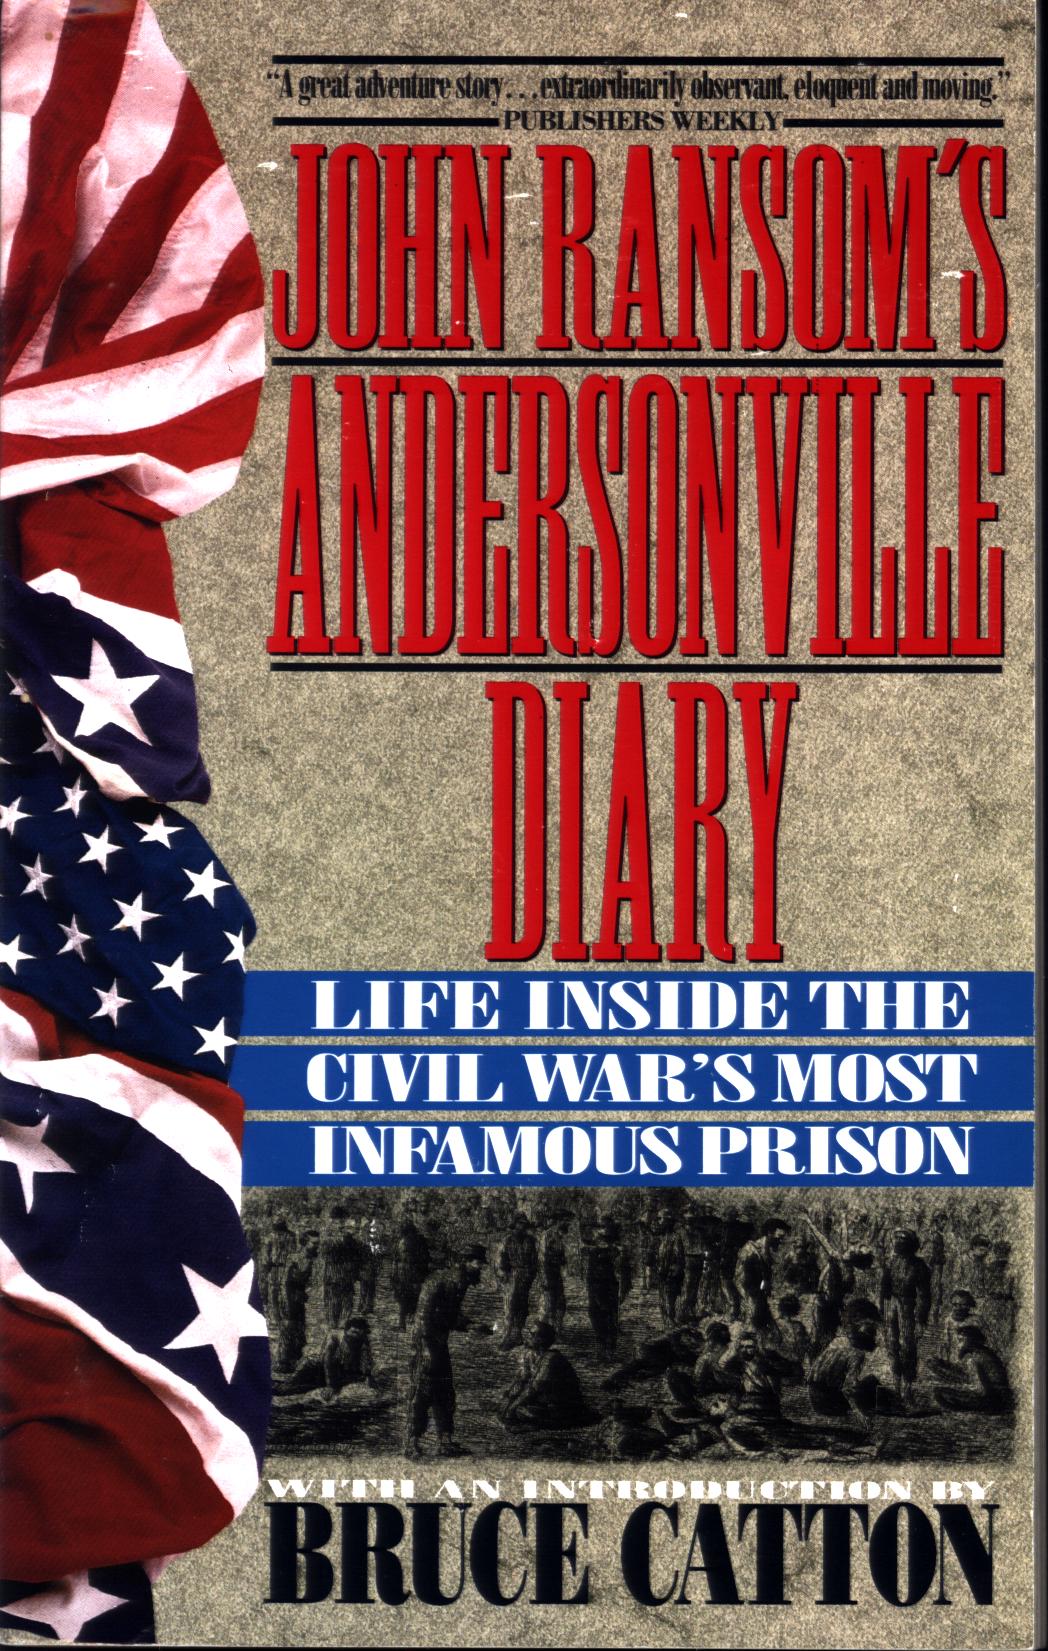 JOHN RANSOM'S ANDERSONVILLE DIARY: life inside the Civil War's most famous prison. 